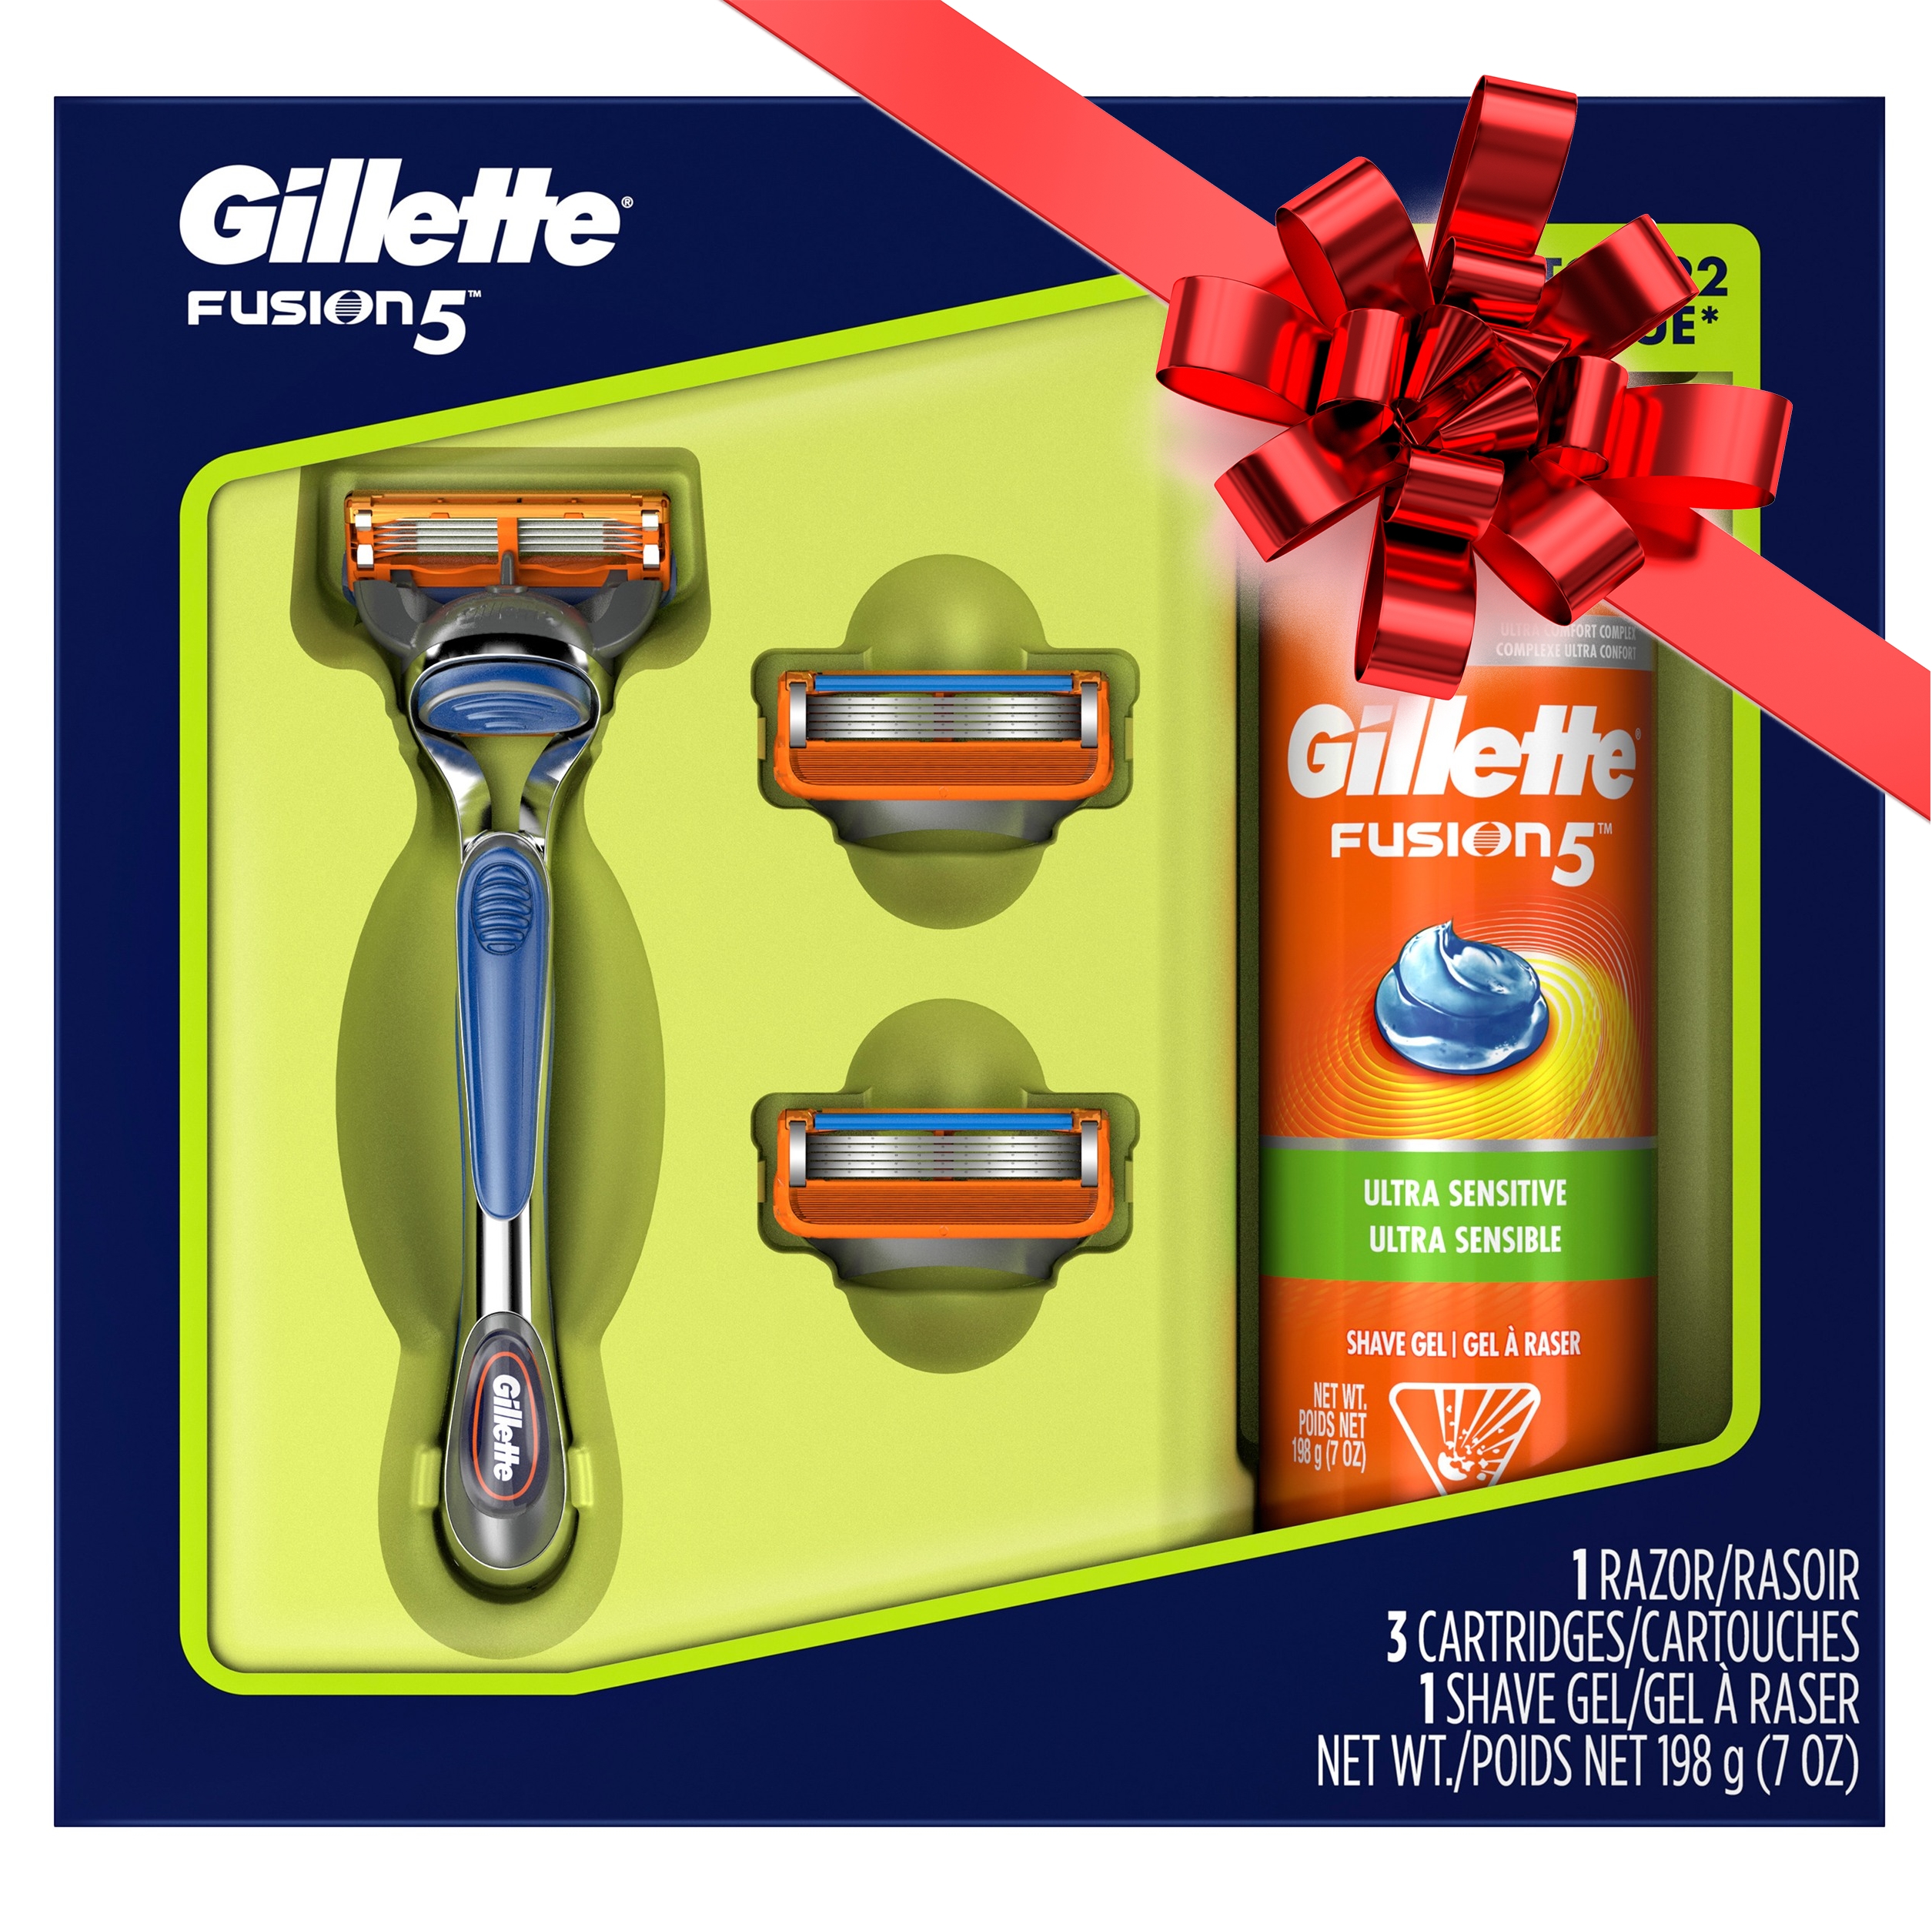 Gillette Fusion5 Razor Gift Pack - image 1 of 8